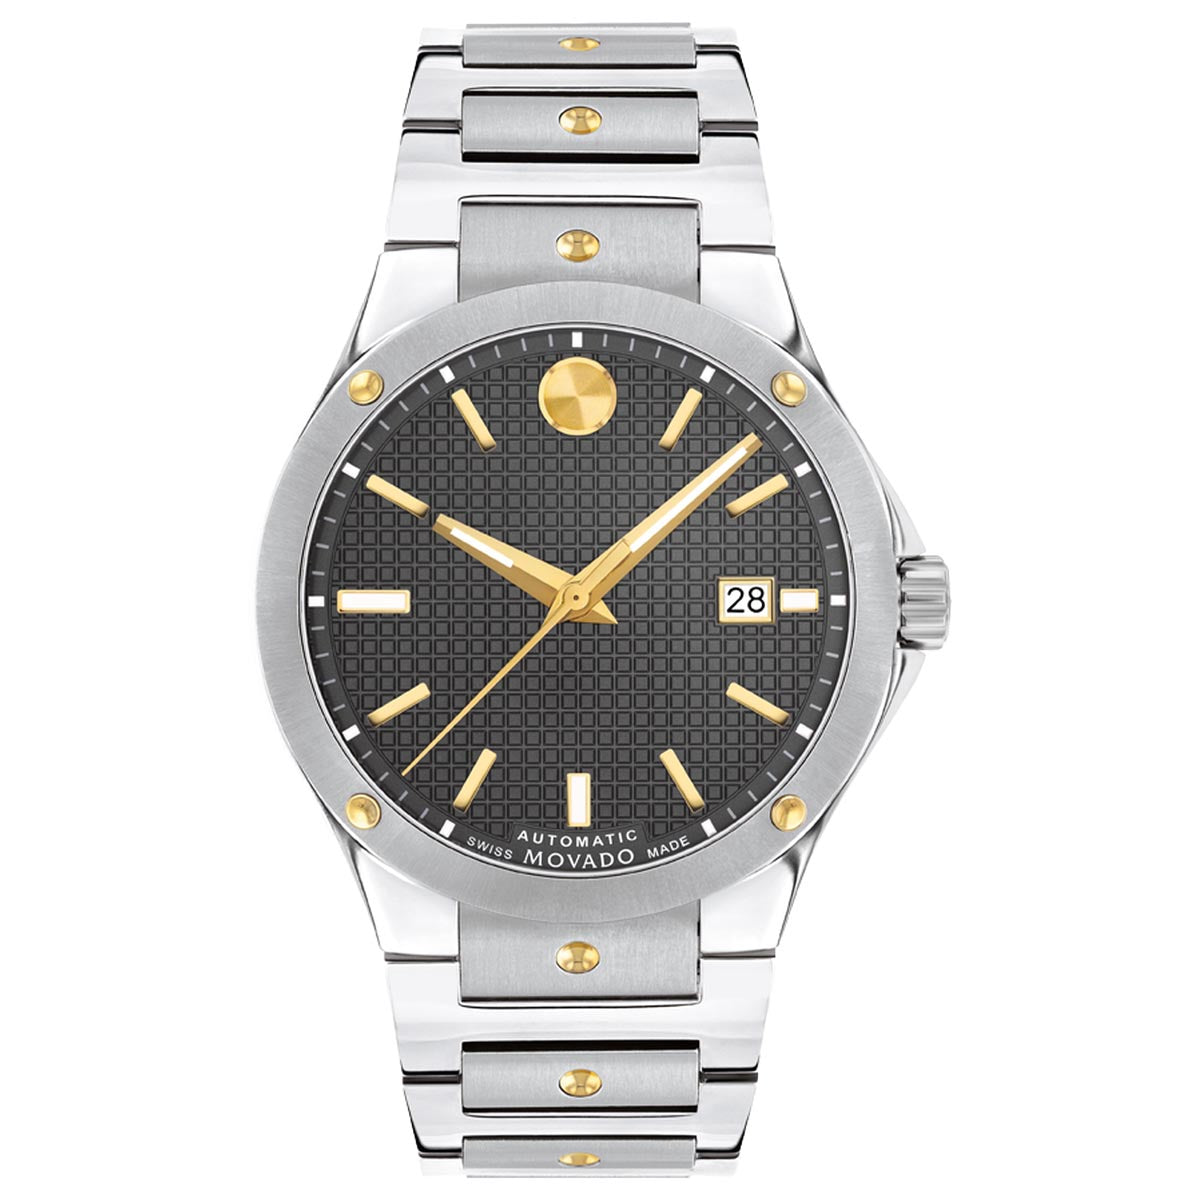 Movado SE Mens Watch with Gray Dial and Stainless Steel and Yellow PVD Bracelet (automatic movement)